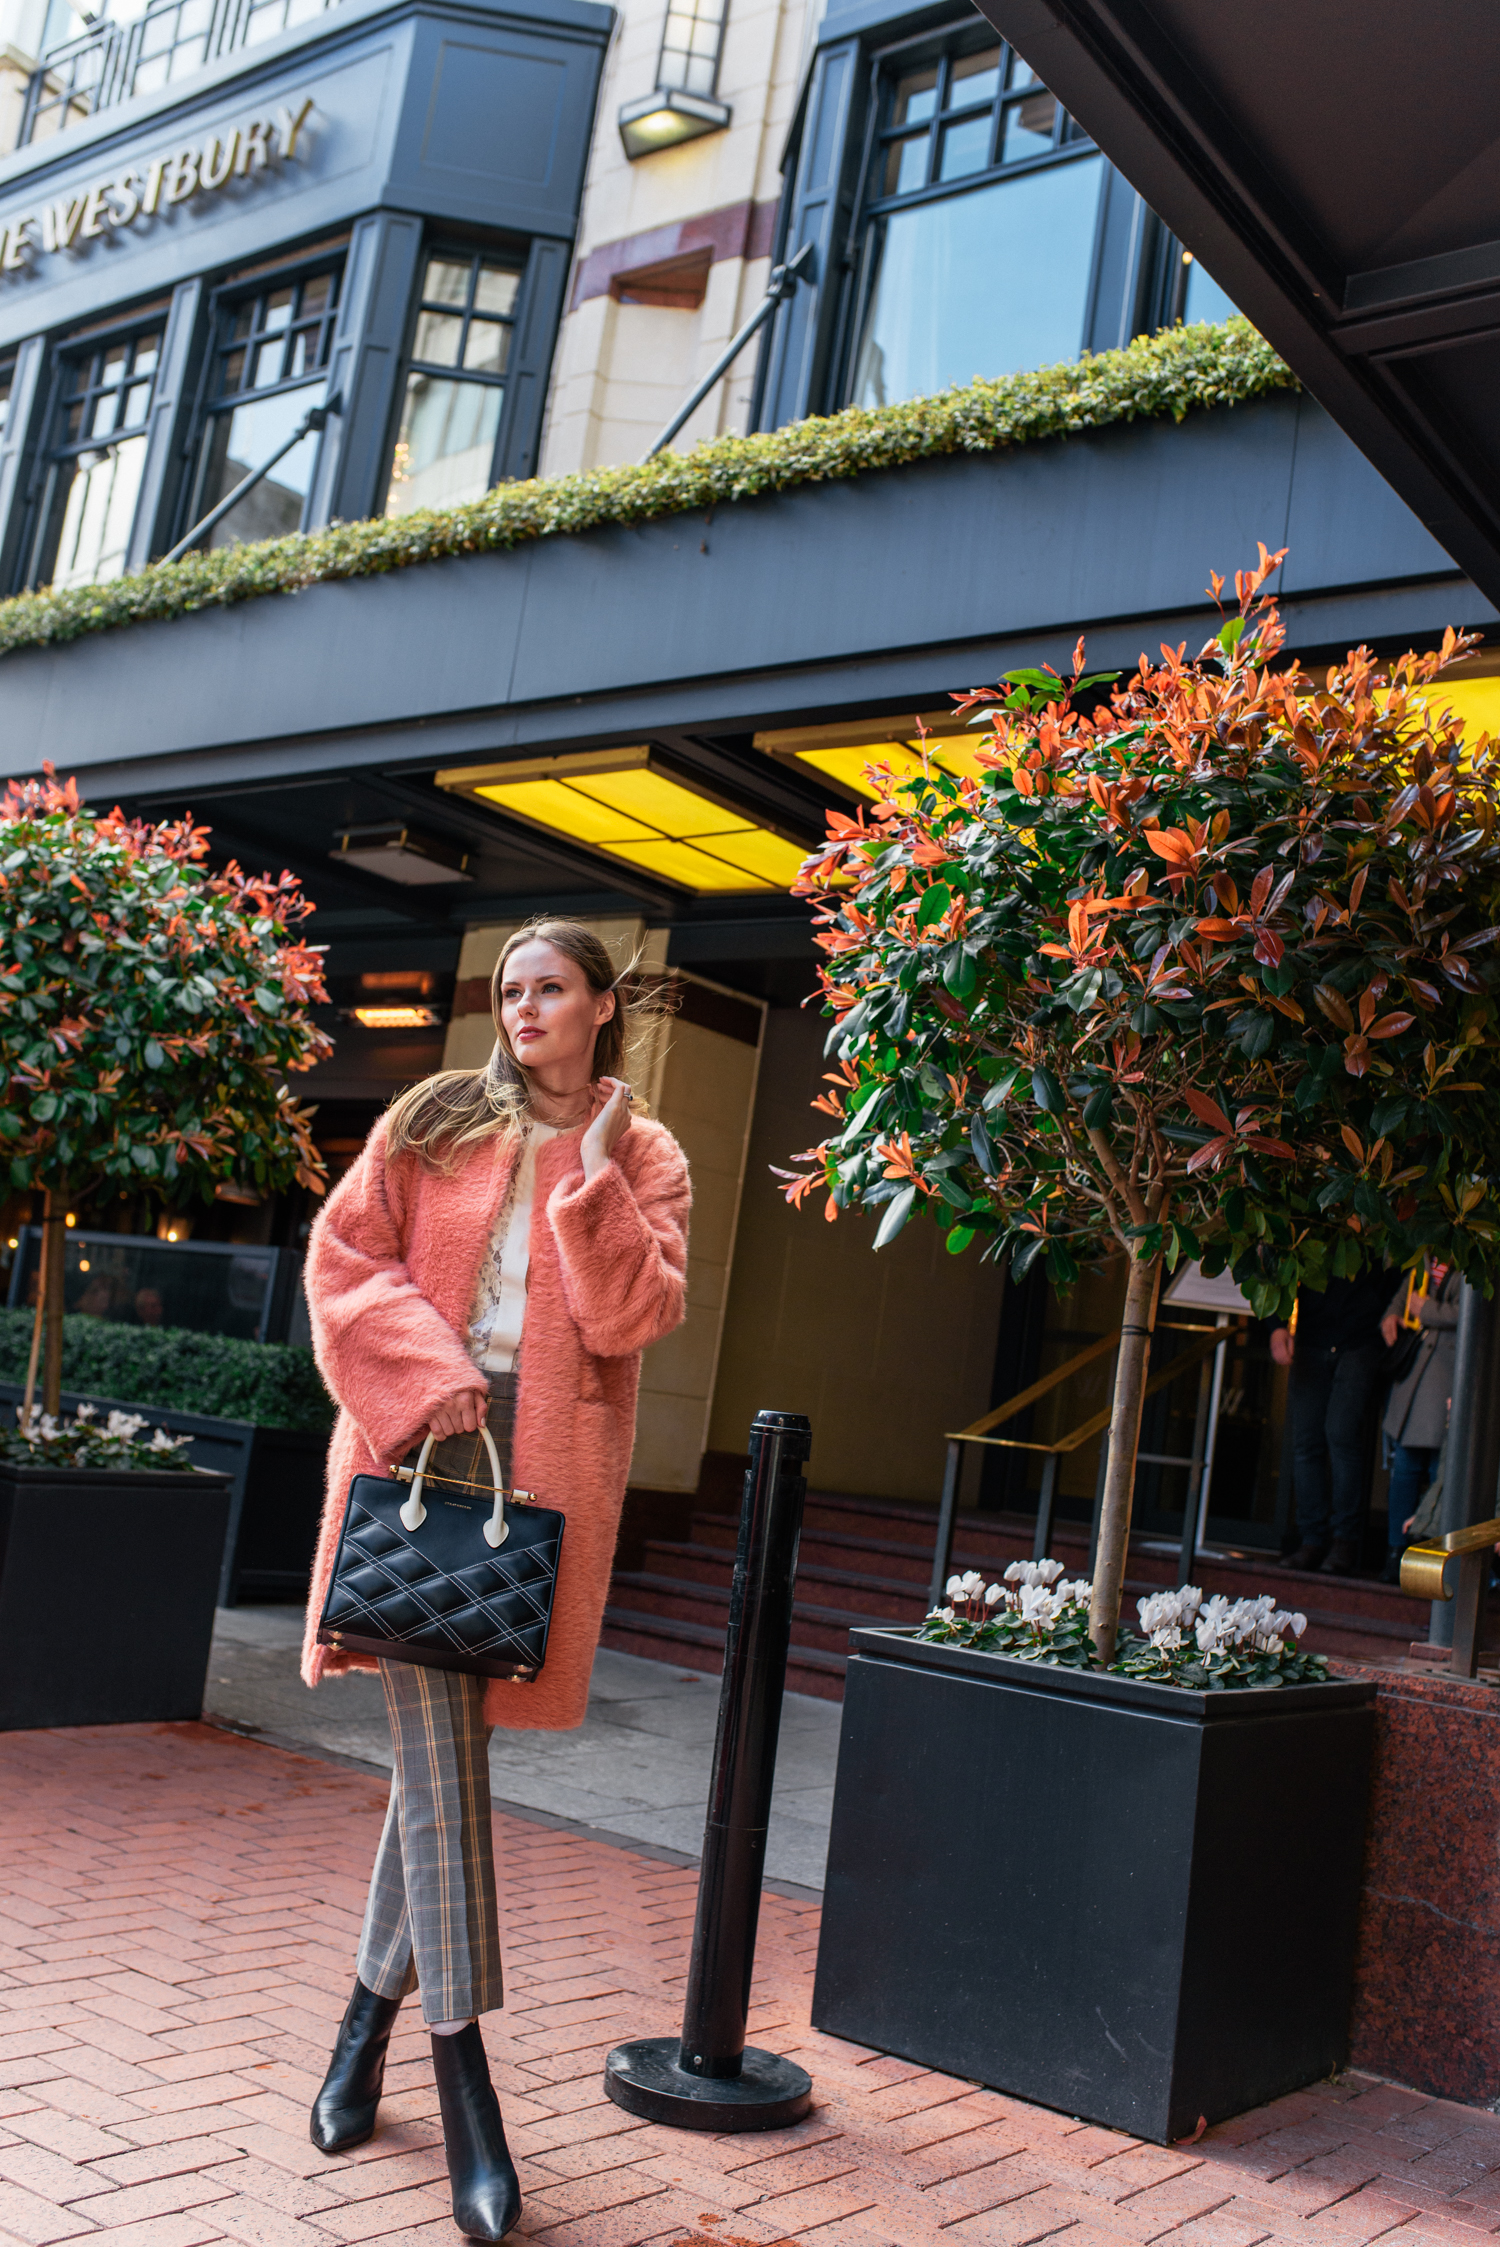 Alyssa Campanella of The A List blog visits The Westbury in Dublin, Ireland wearing By Tsang Fuzzy II robe, Maje Puya plaid pants, and Strathberry quilted midi tote